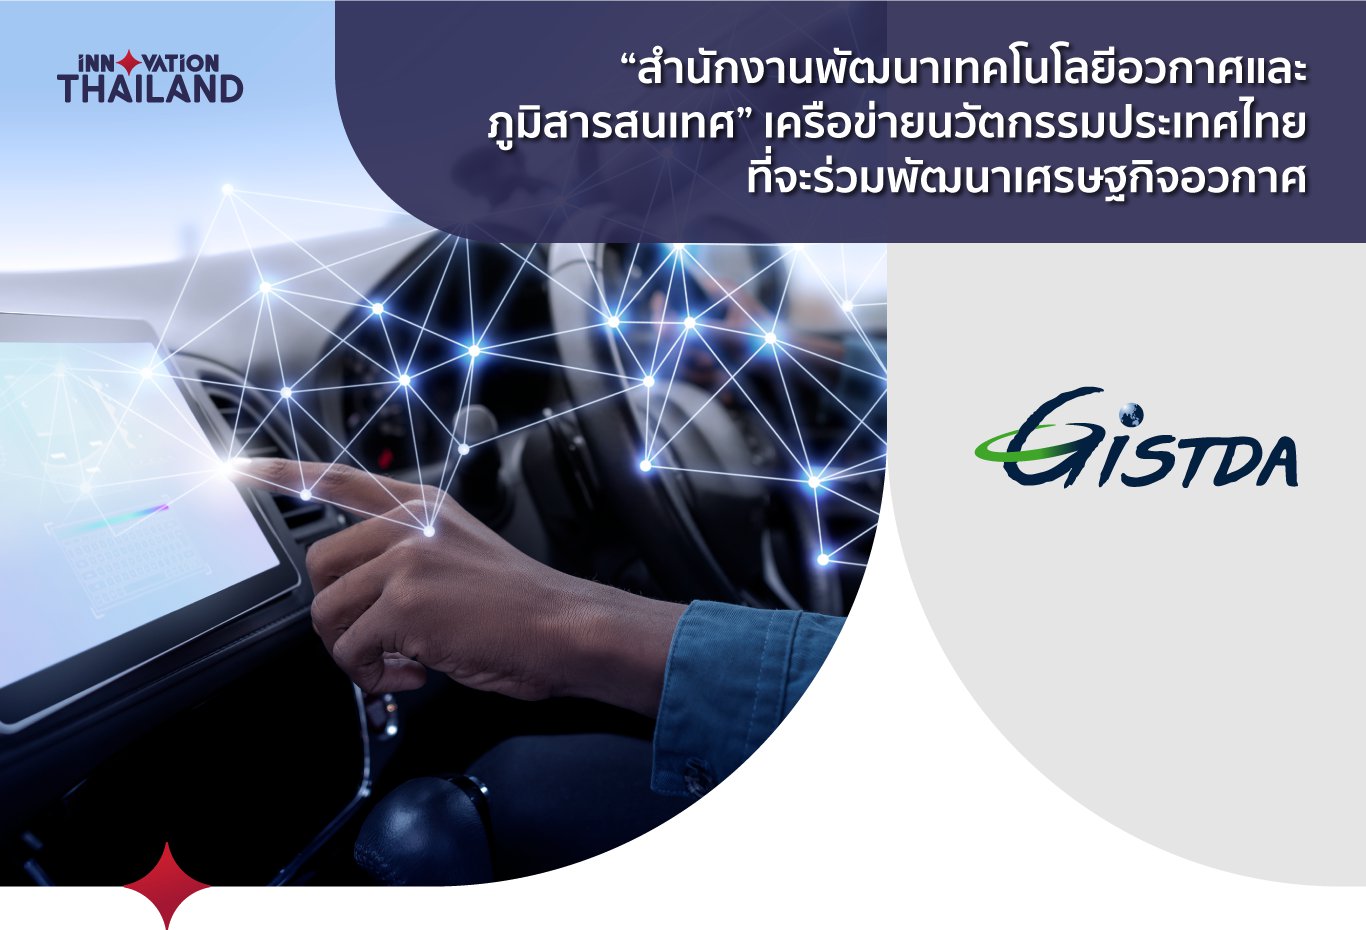 Geo-Informatics and Space Technology Development Agency: Part of the Innovation Thailand Alliance’s Collaboration to Develop a Space Economy